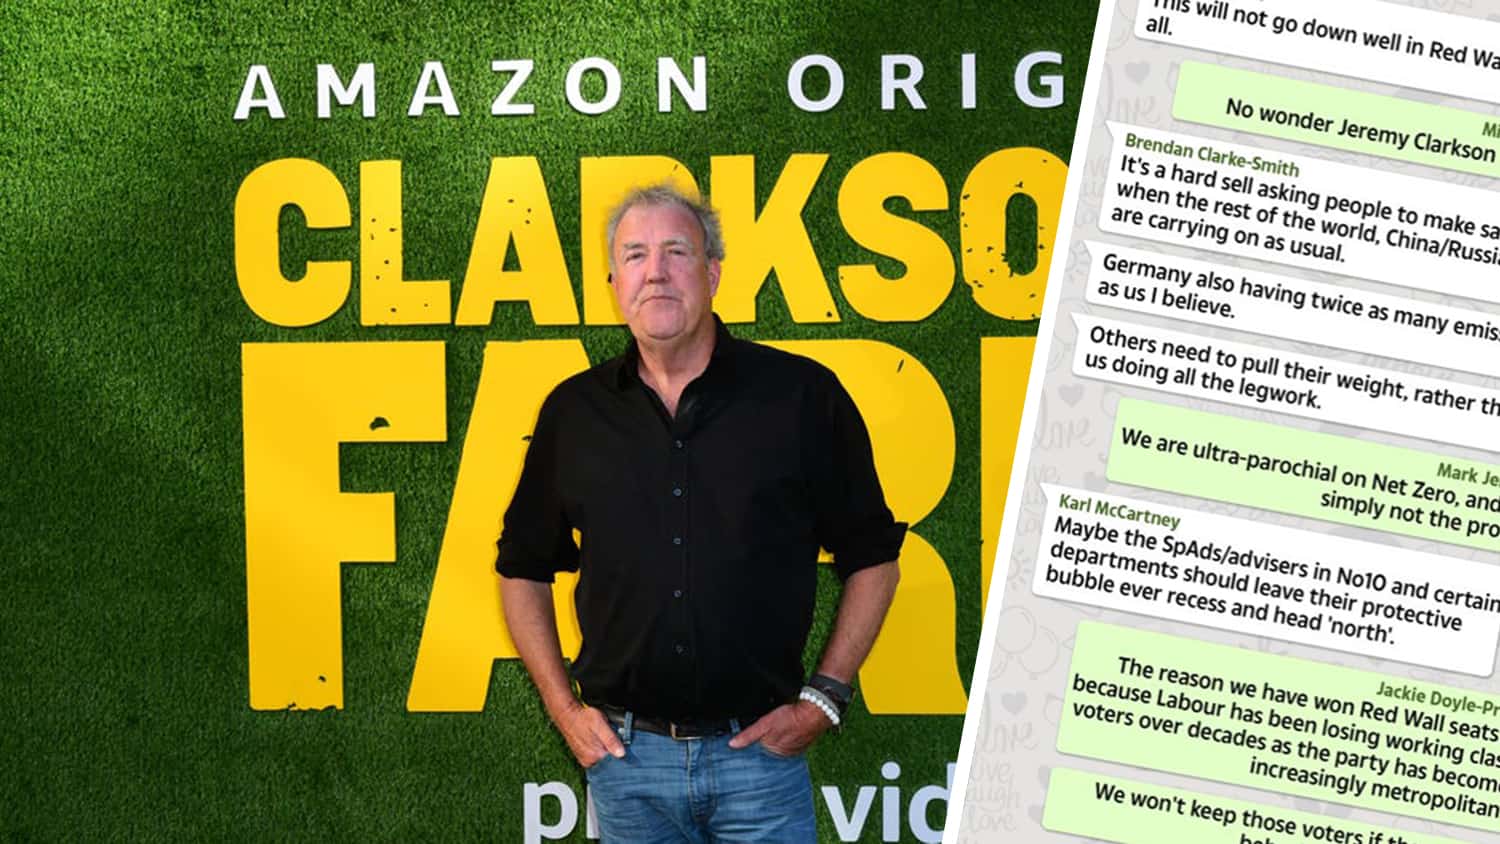 ‘No wonder Jeremy Clarkson votes for us!’: Tories bemoan climate plans in leaked WhatsApp messages